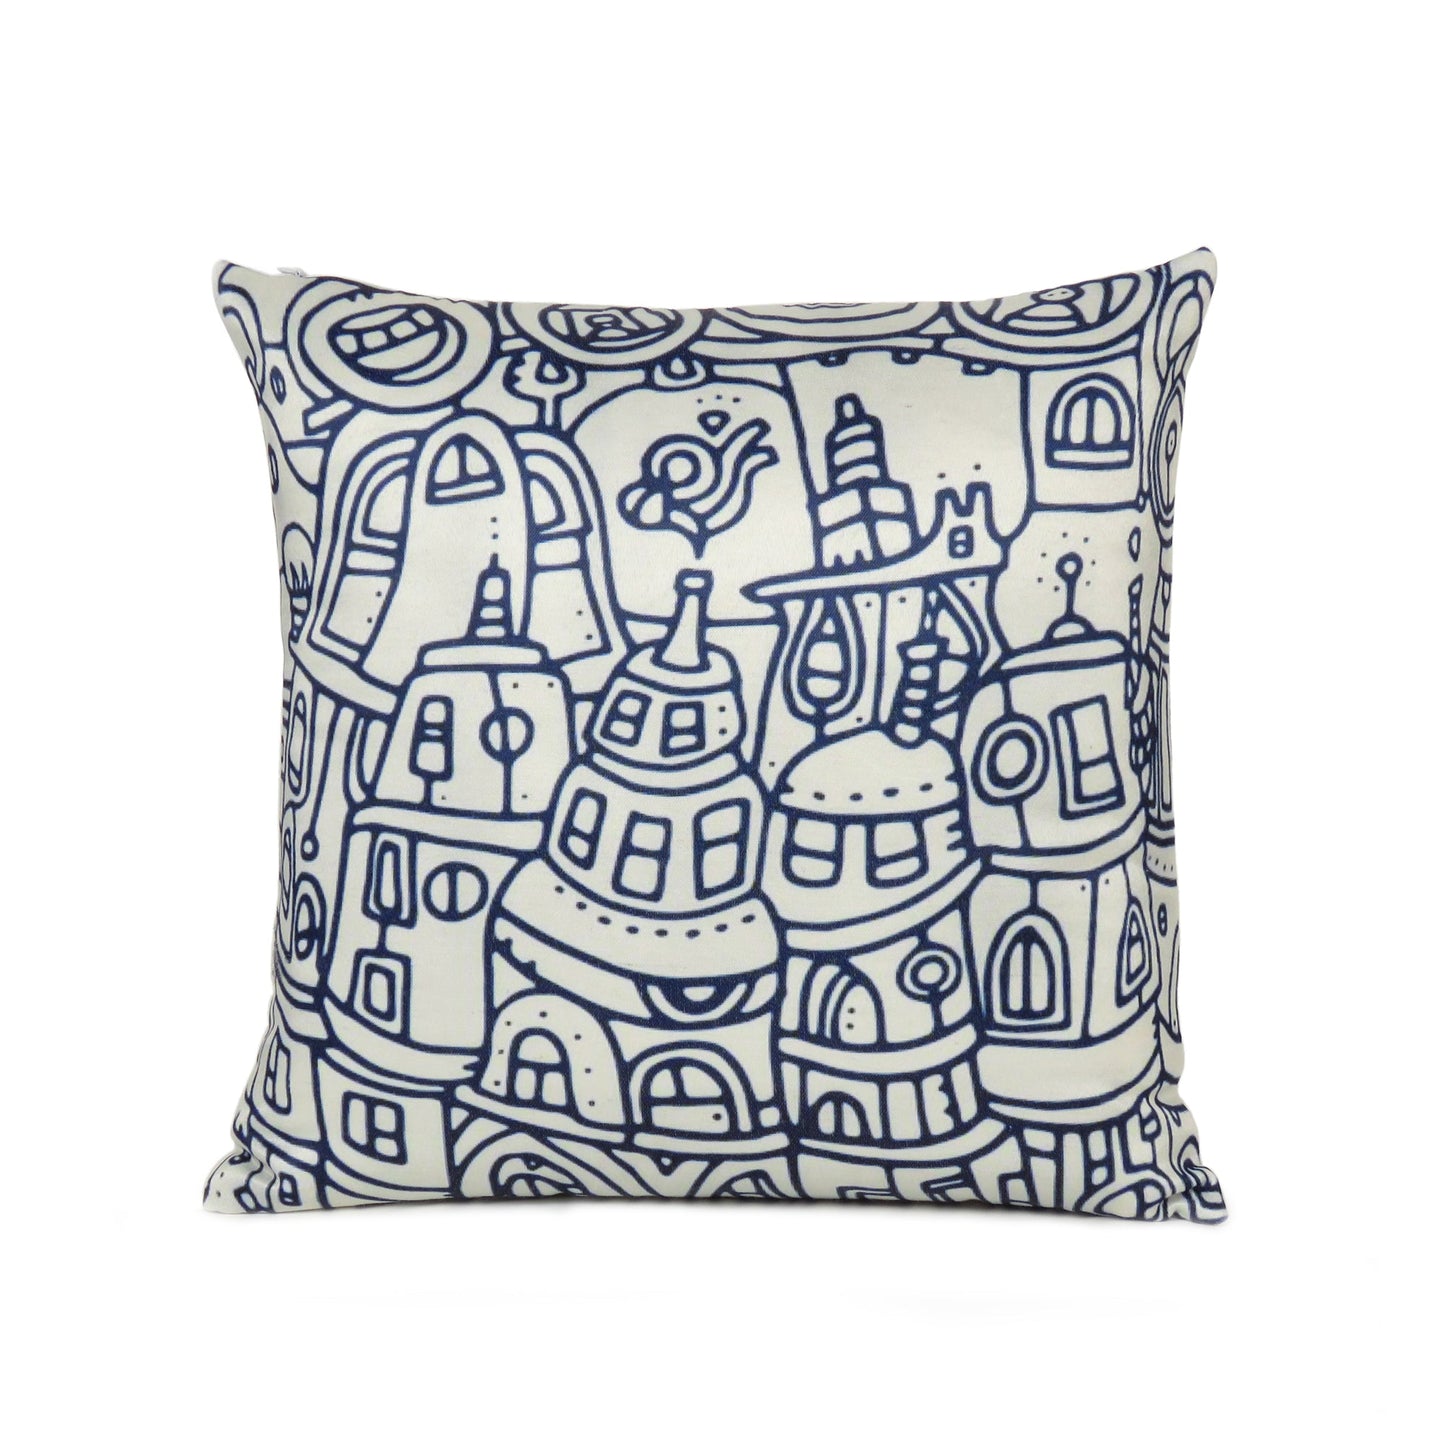 Blue Doodle City Printed Cushion Cover in Set of 2